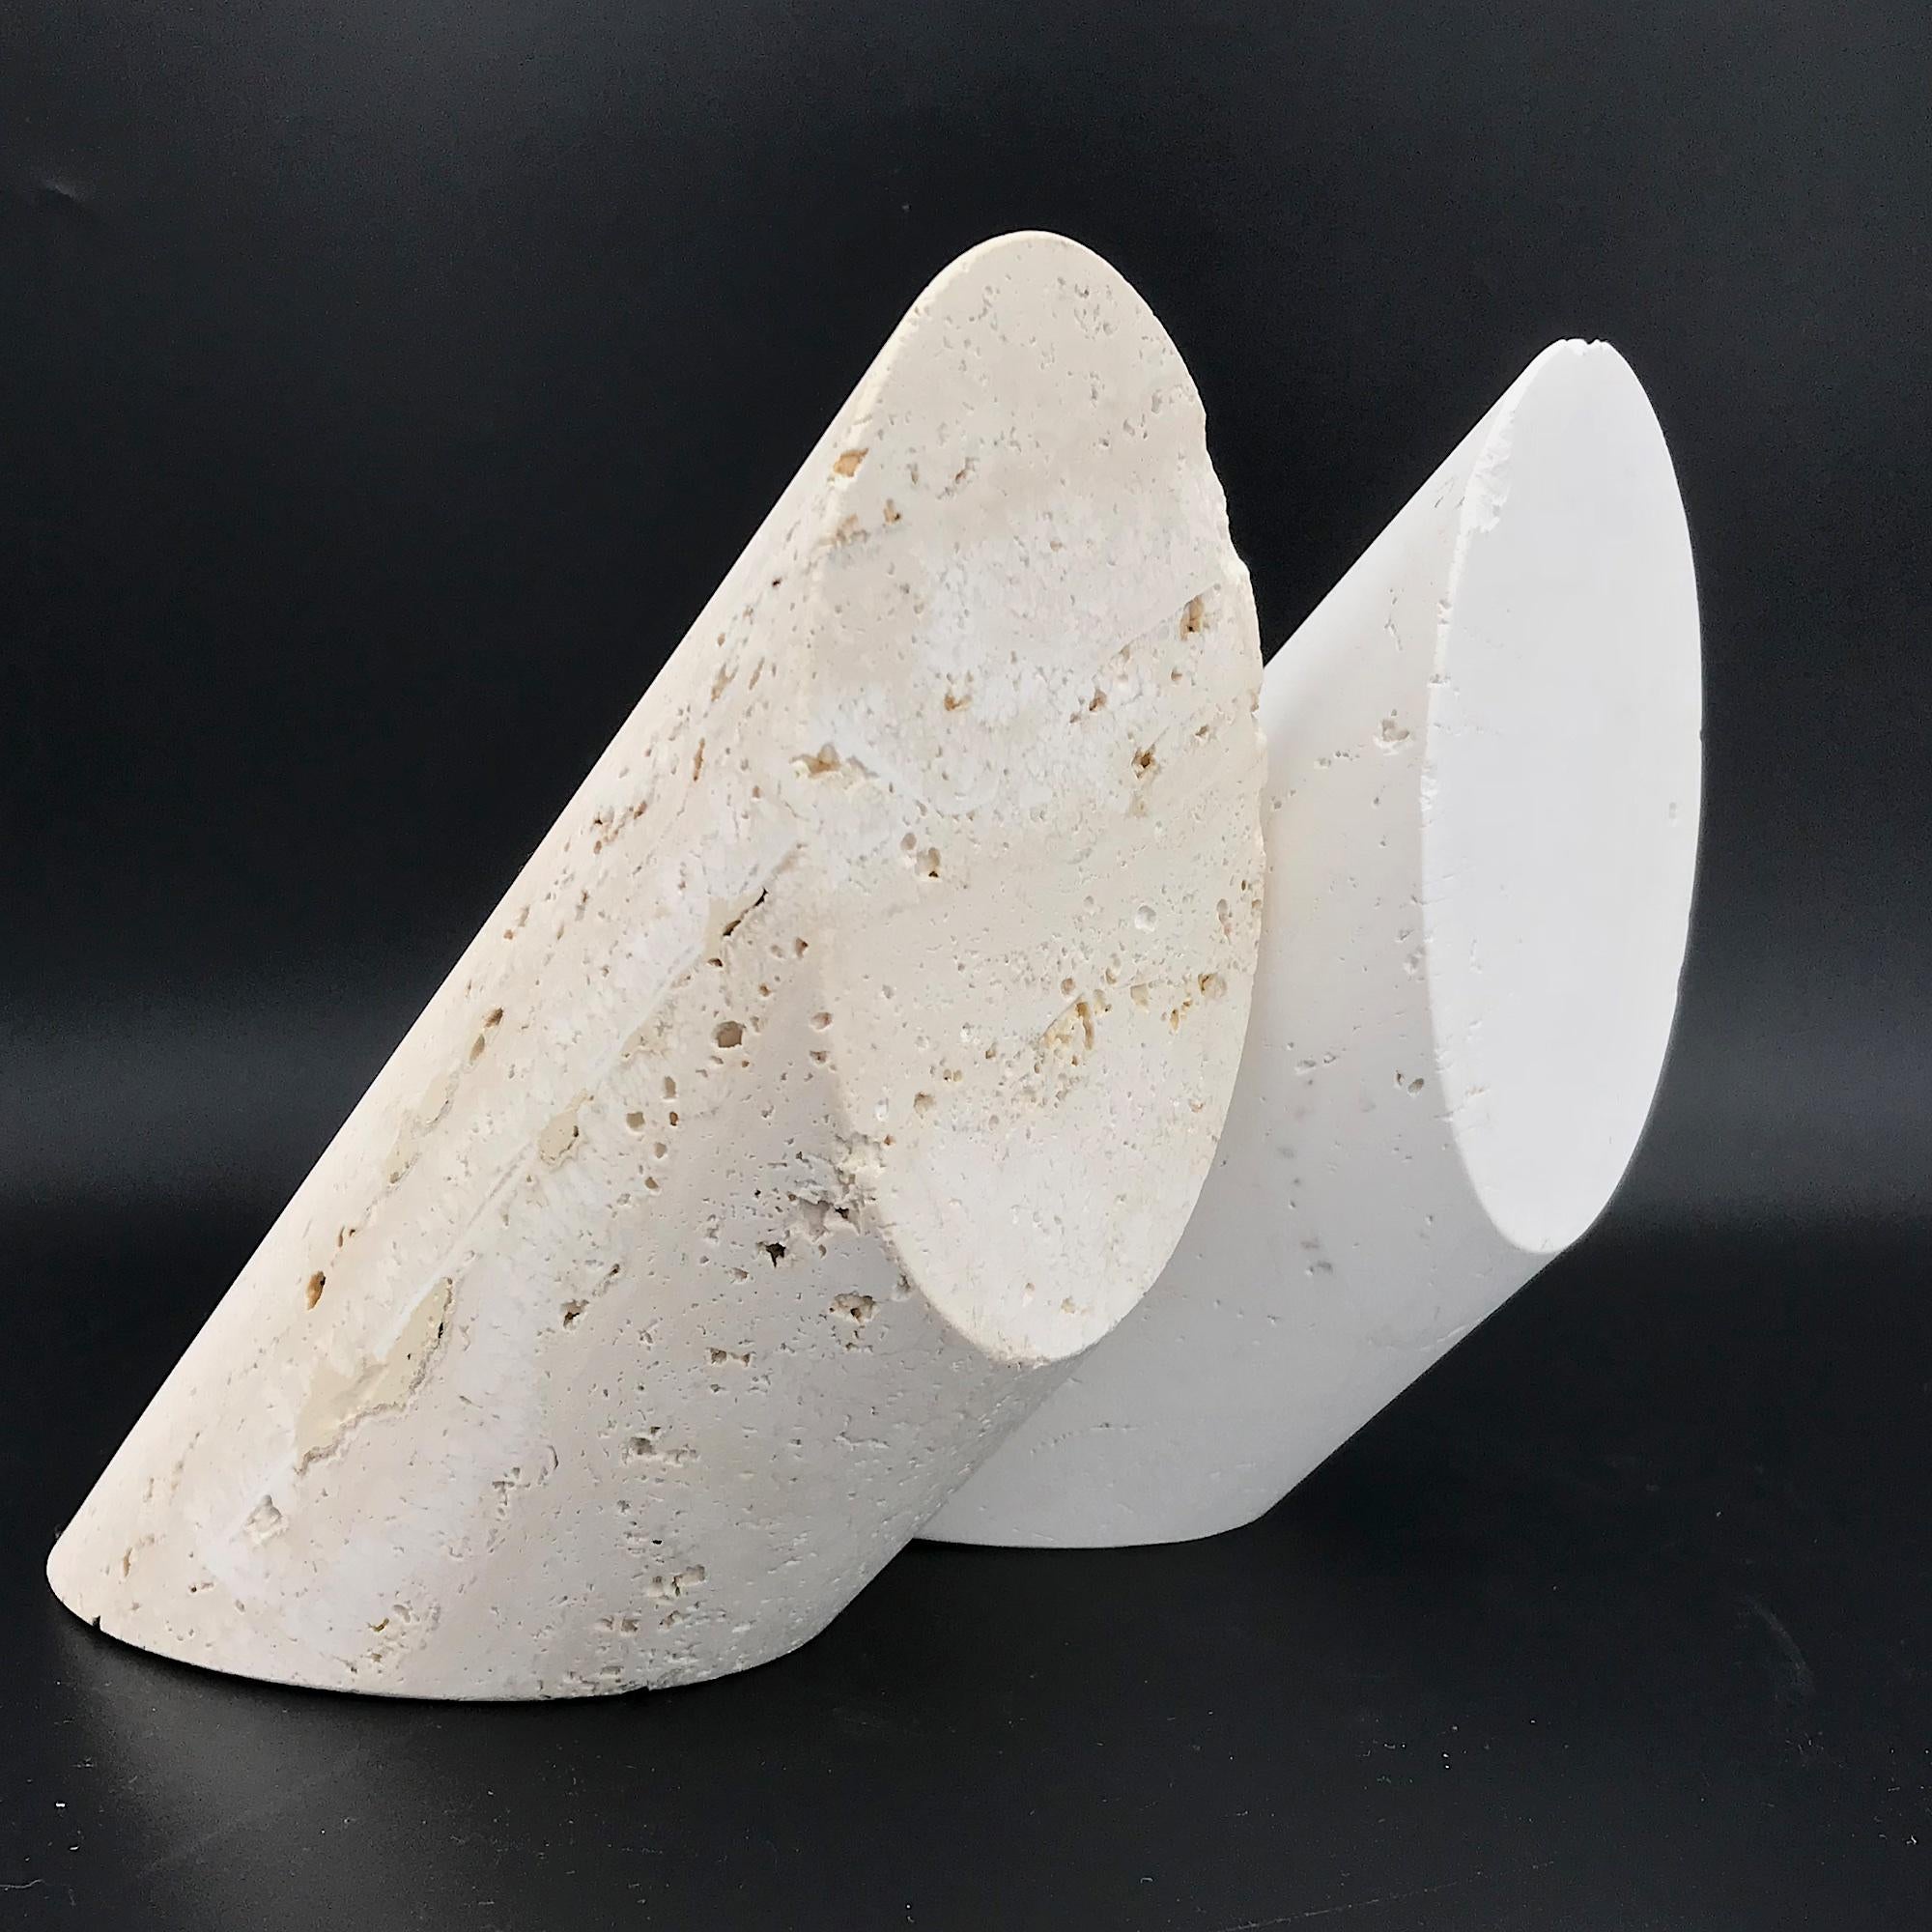 Rare but worn and chipped. Minimalist 1960s Italian stone bookends, form is diagonal cut 4 inch diameter tubes.